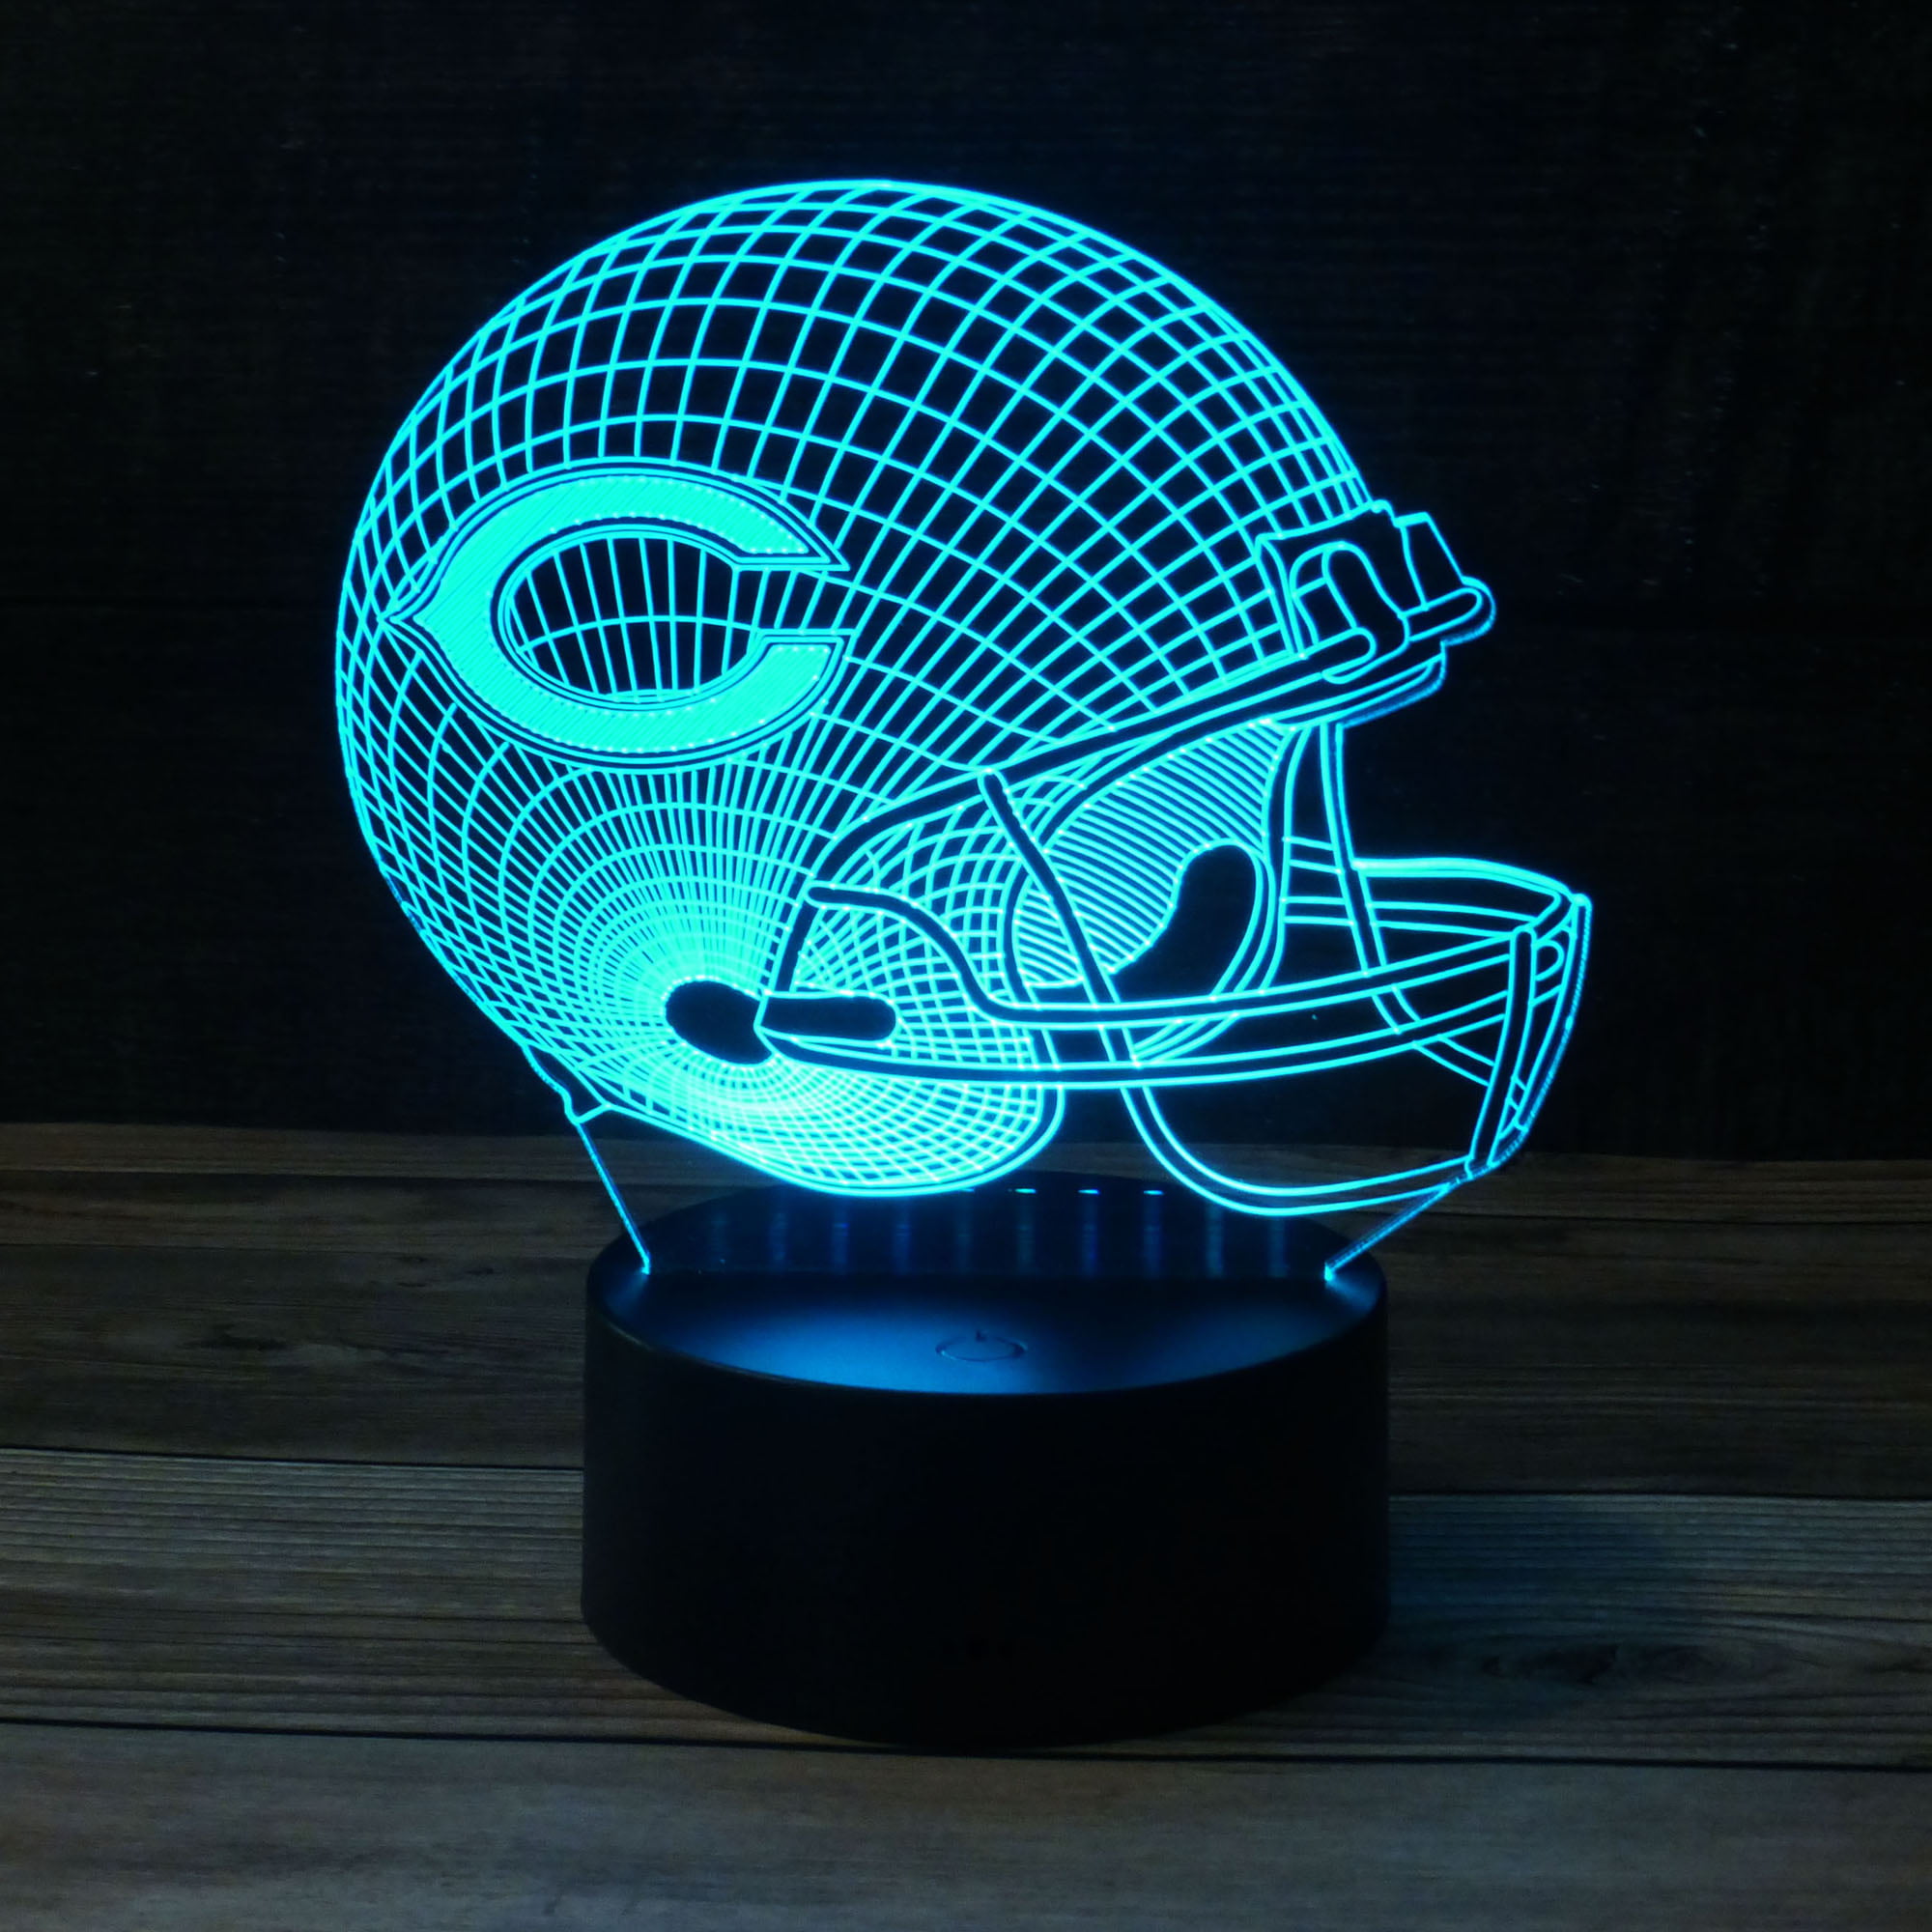 Perfect Gift for Football Sports Lovers Football Helmet Light Cleveland Browns Touch Control Football Helmet Light Lamp- Upgraded Color Changing Touch Light Night Light for Boys Men Women 